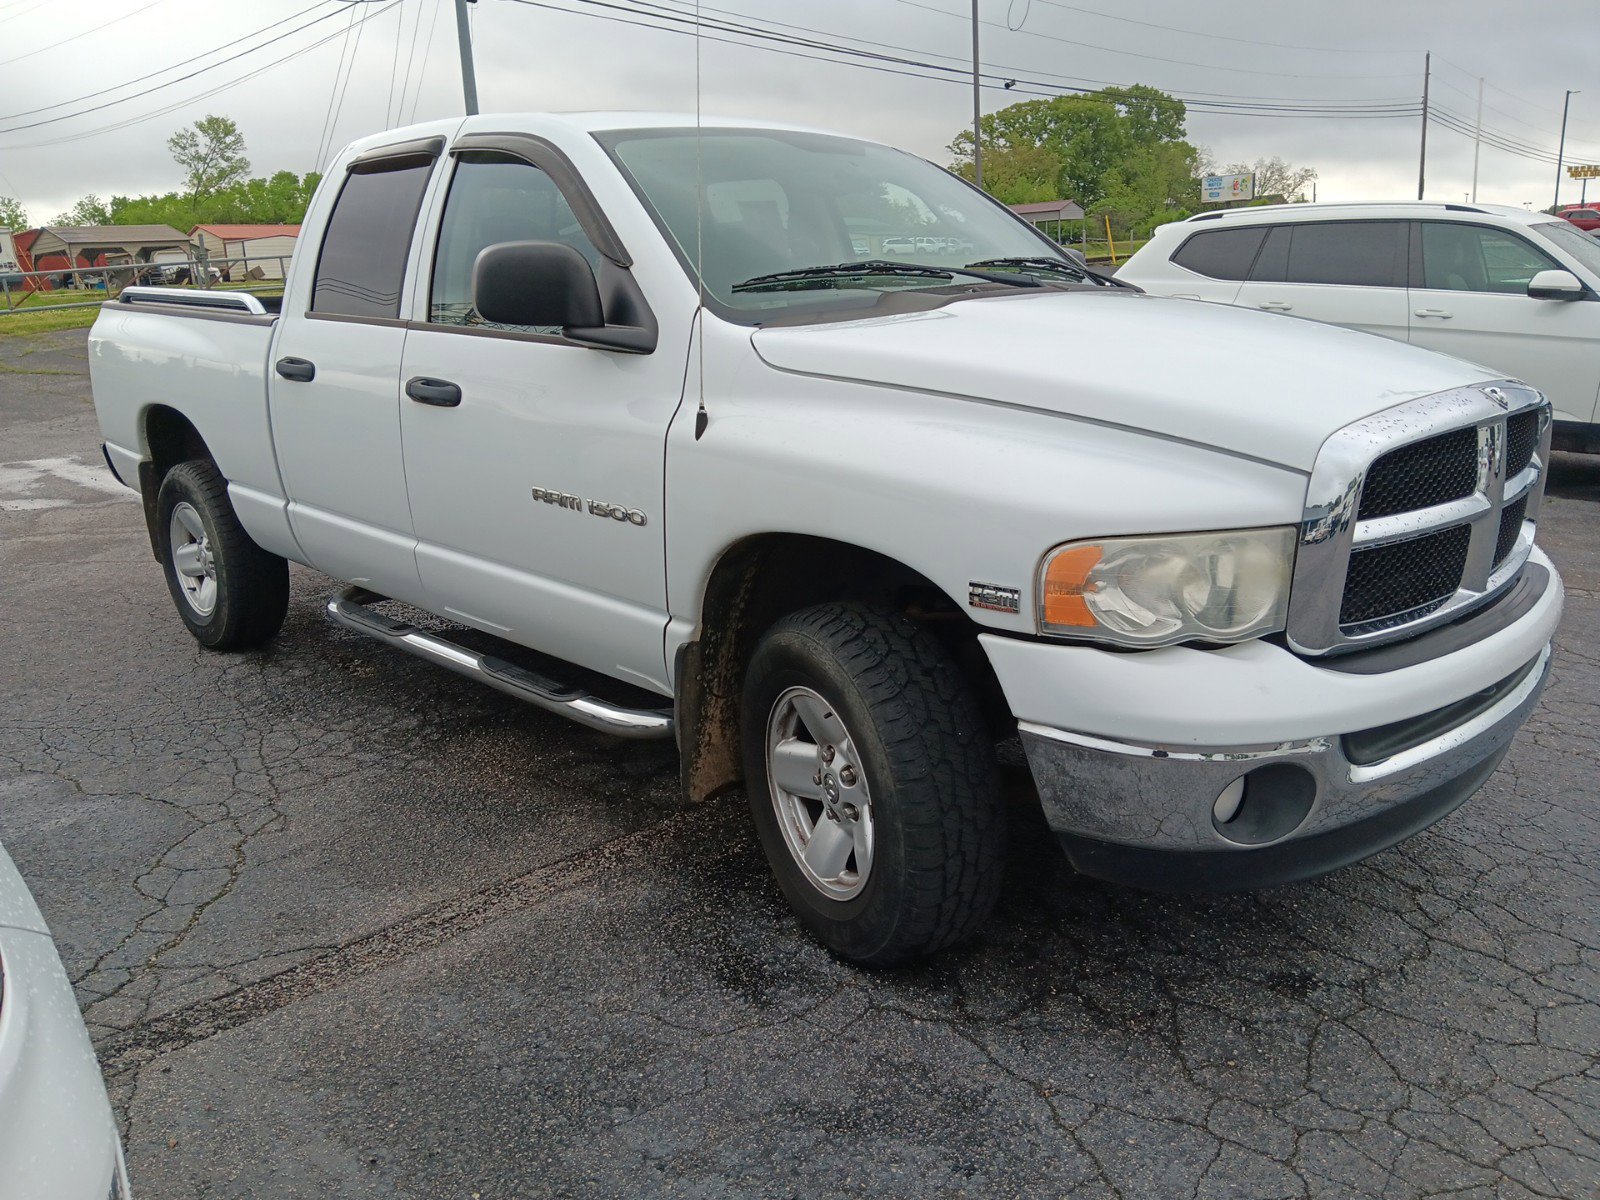 Used 2003 Dodge Ram 1500 Pickup Laramie with VIN 1D7HU18D03S317165 for sale in Muscle Shoals, AL